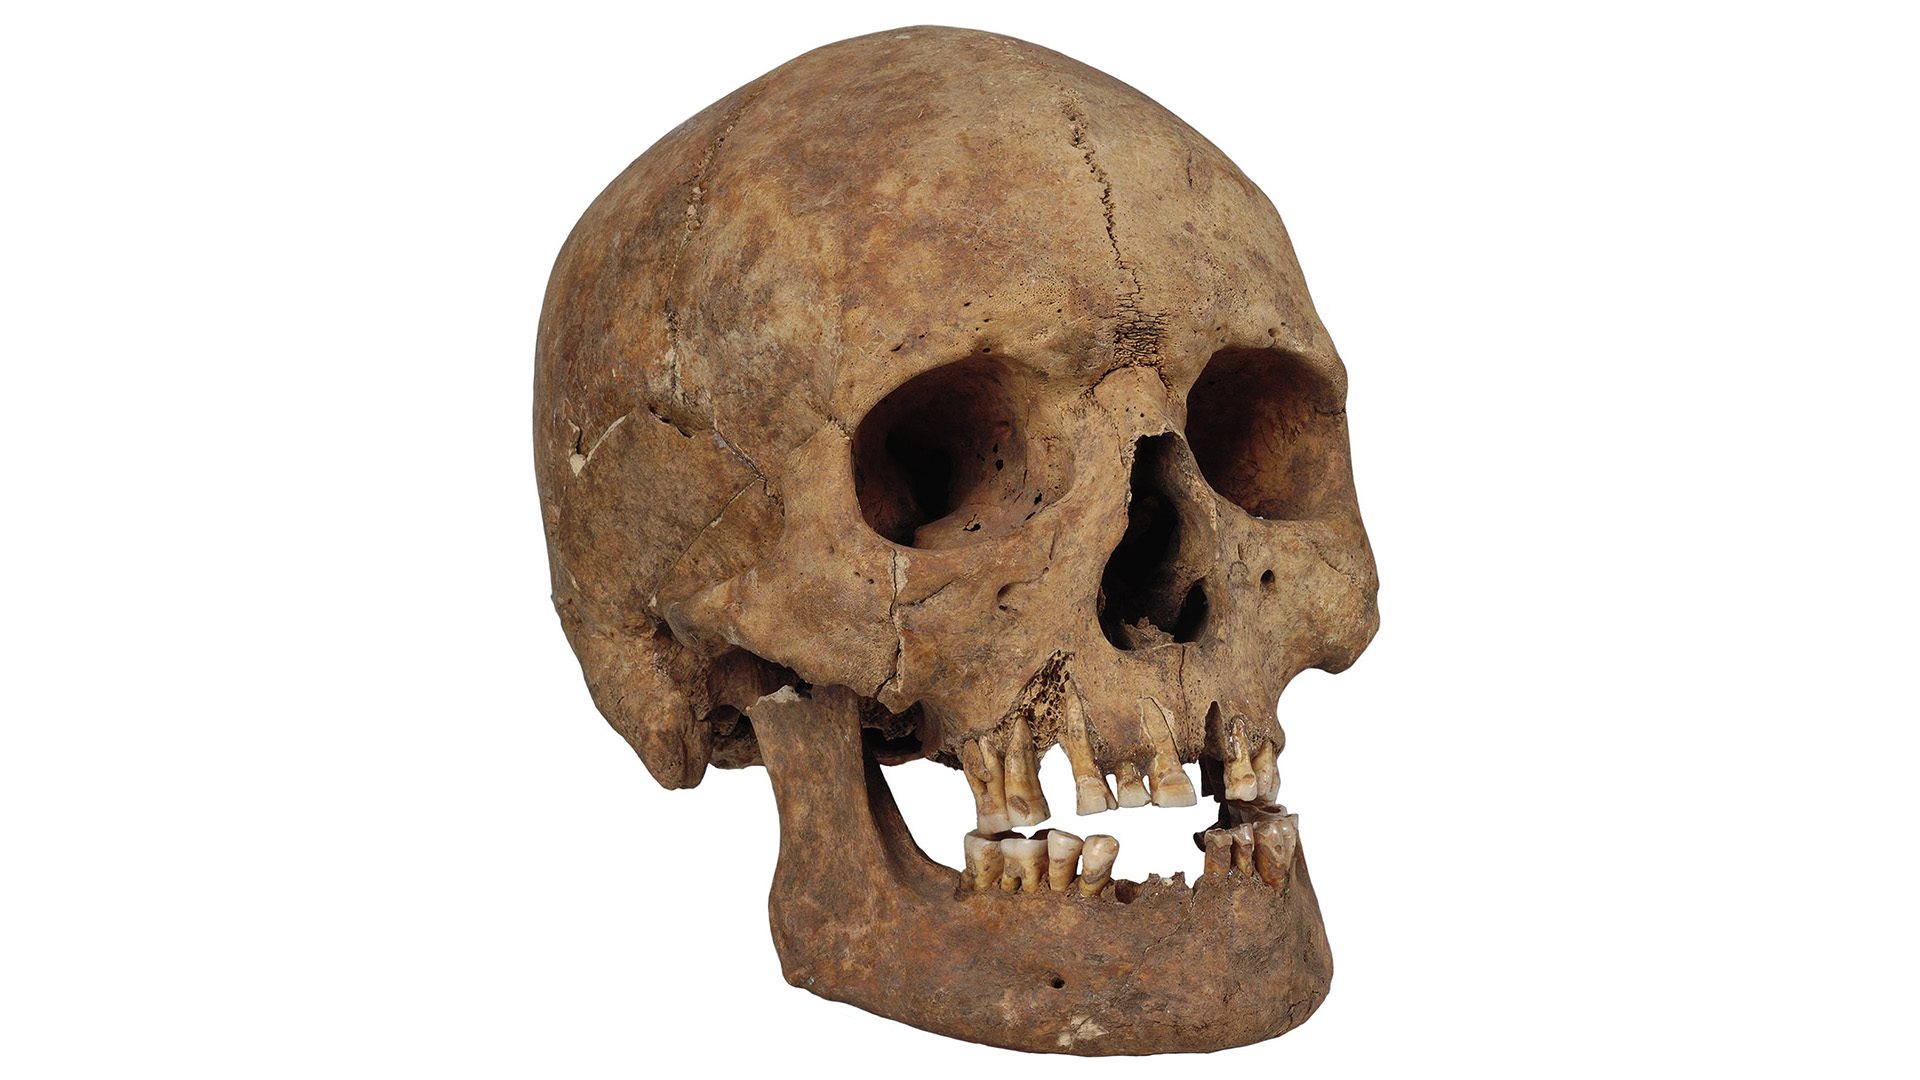 The skull of a man with filed teeth who was buried on Gotland during the Viking Age.